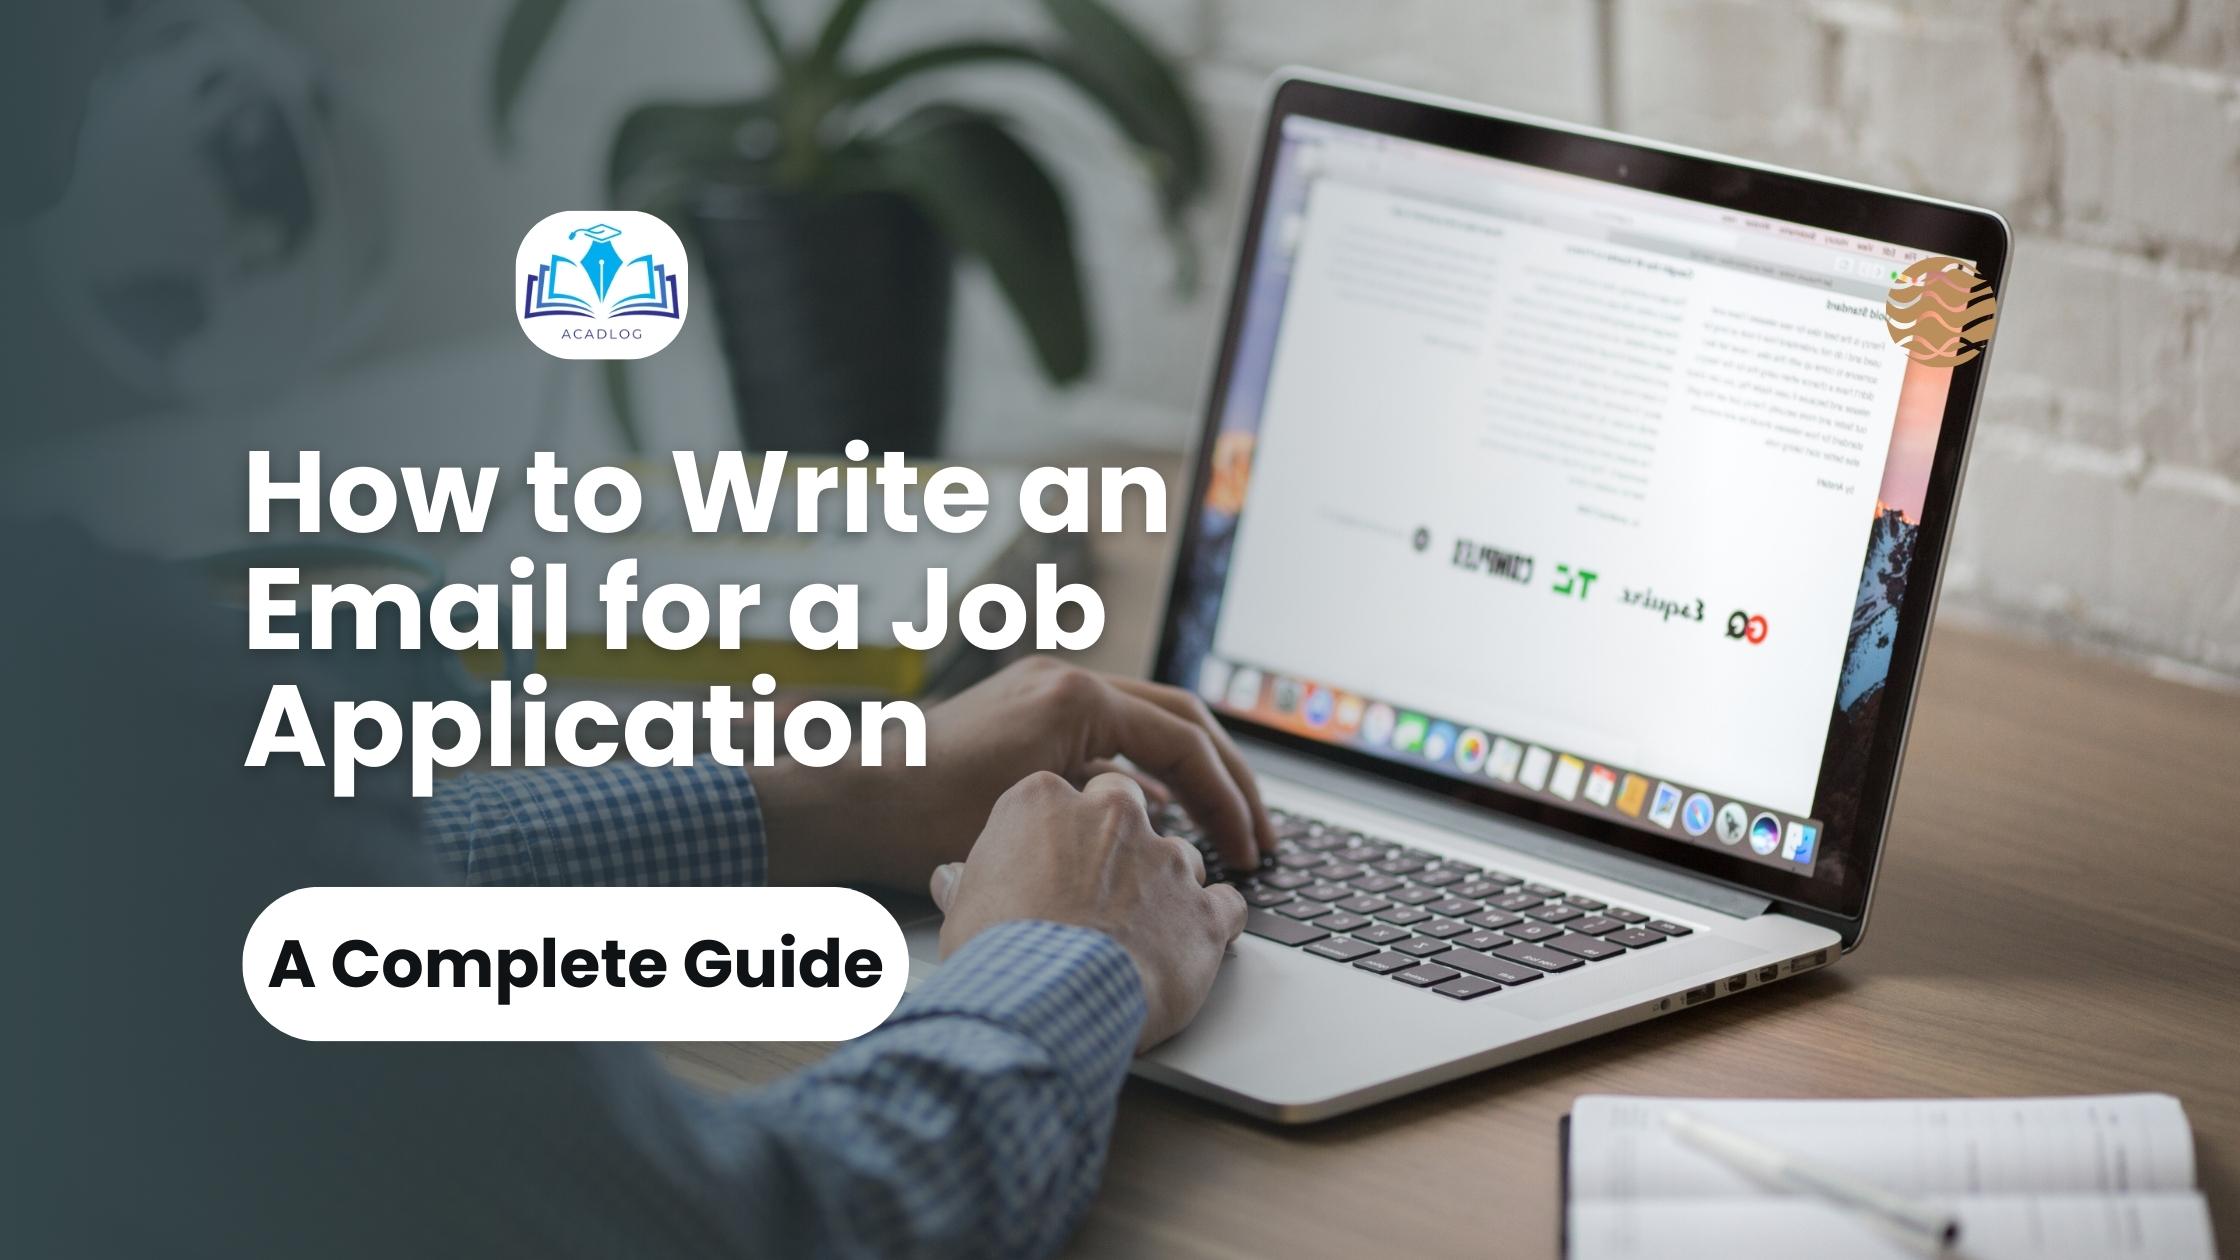 How to Write an Email for a Job Application